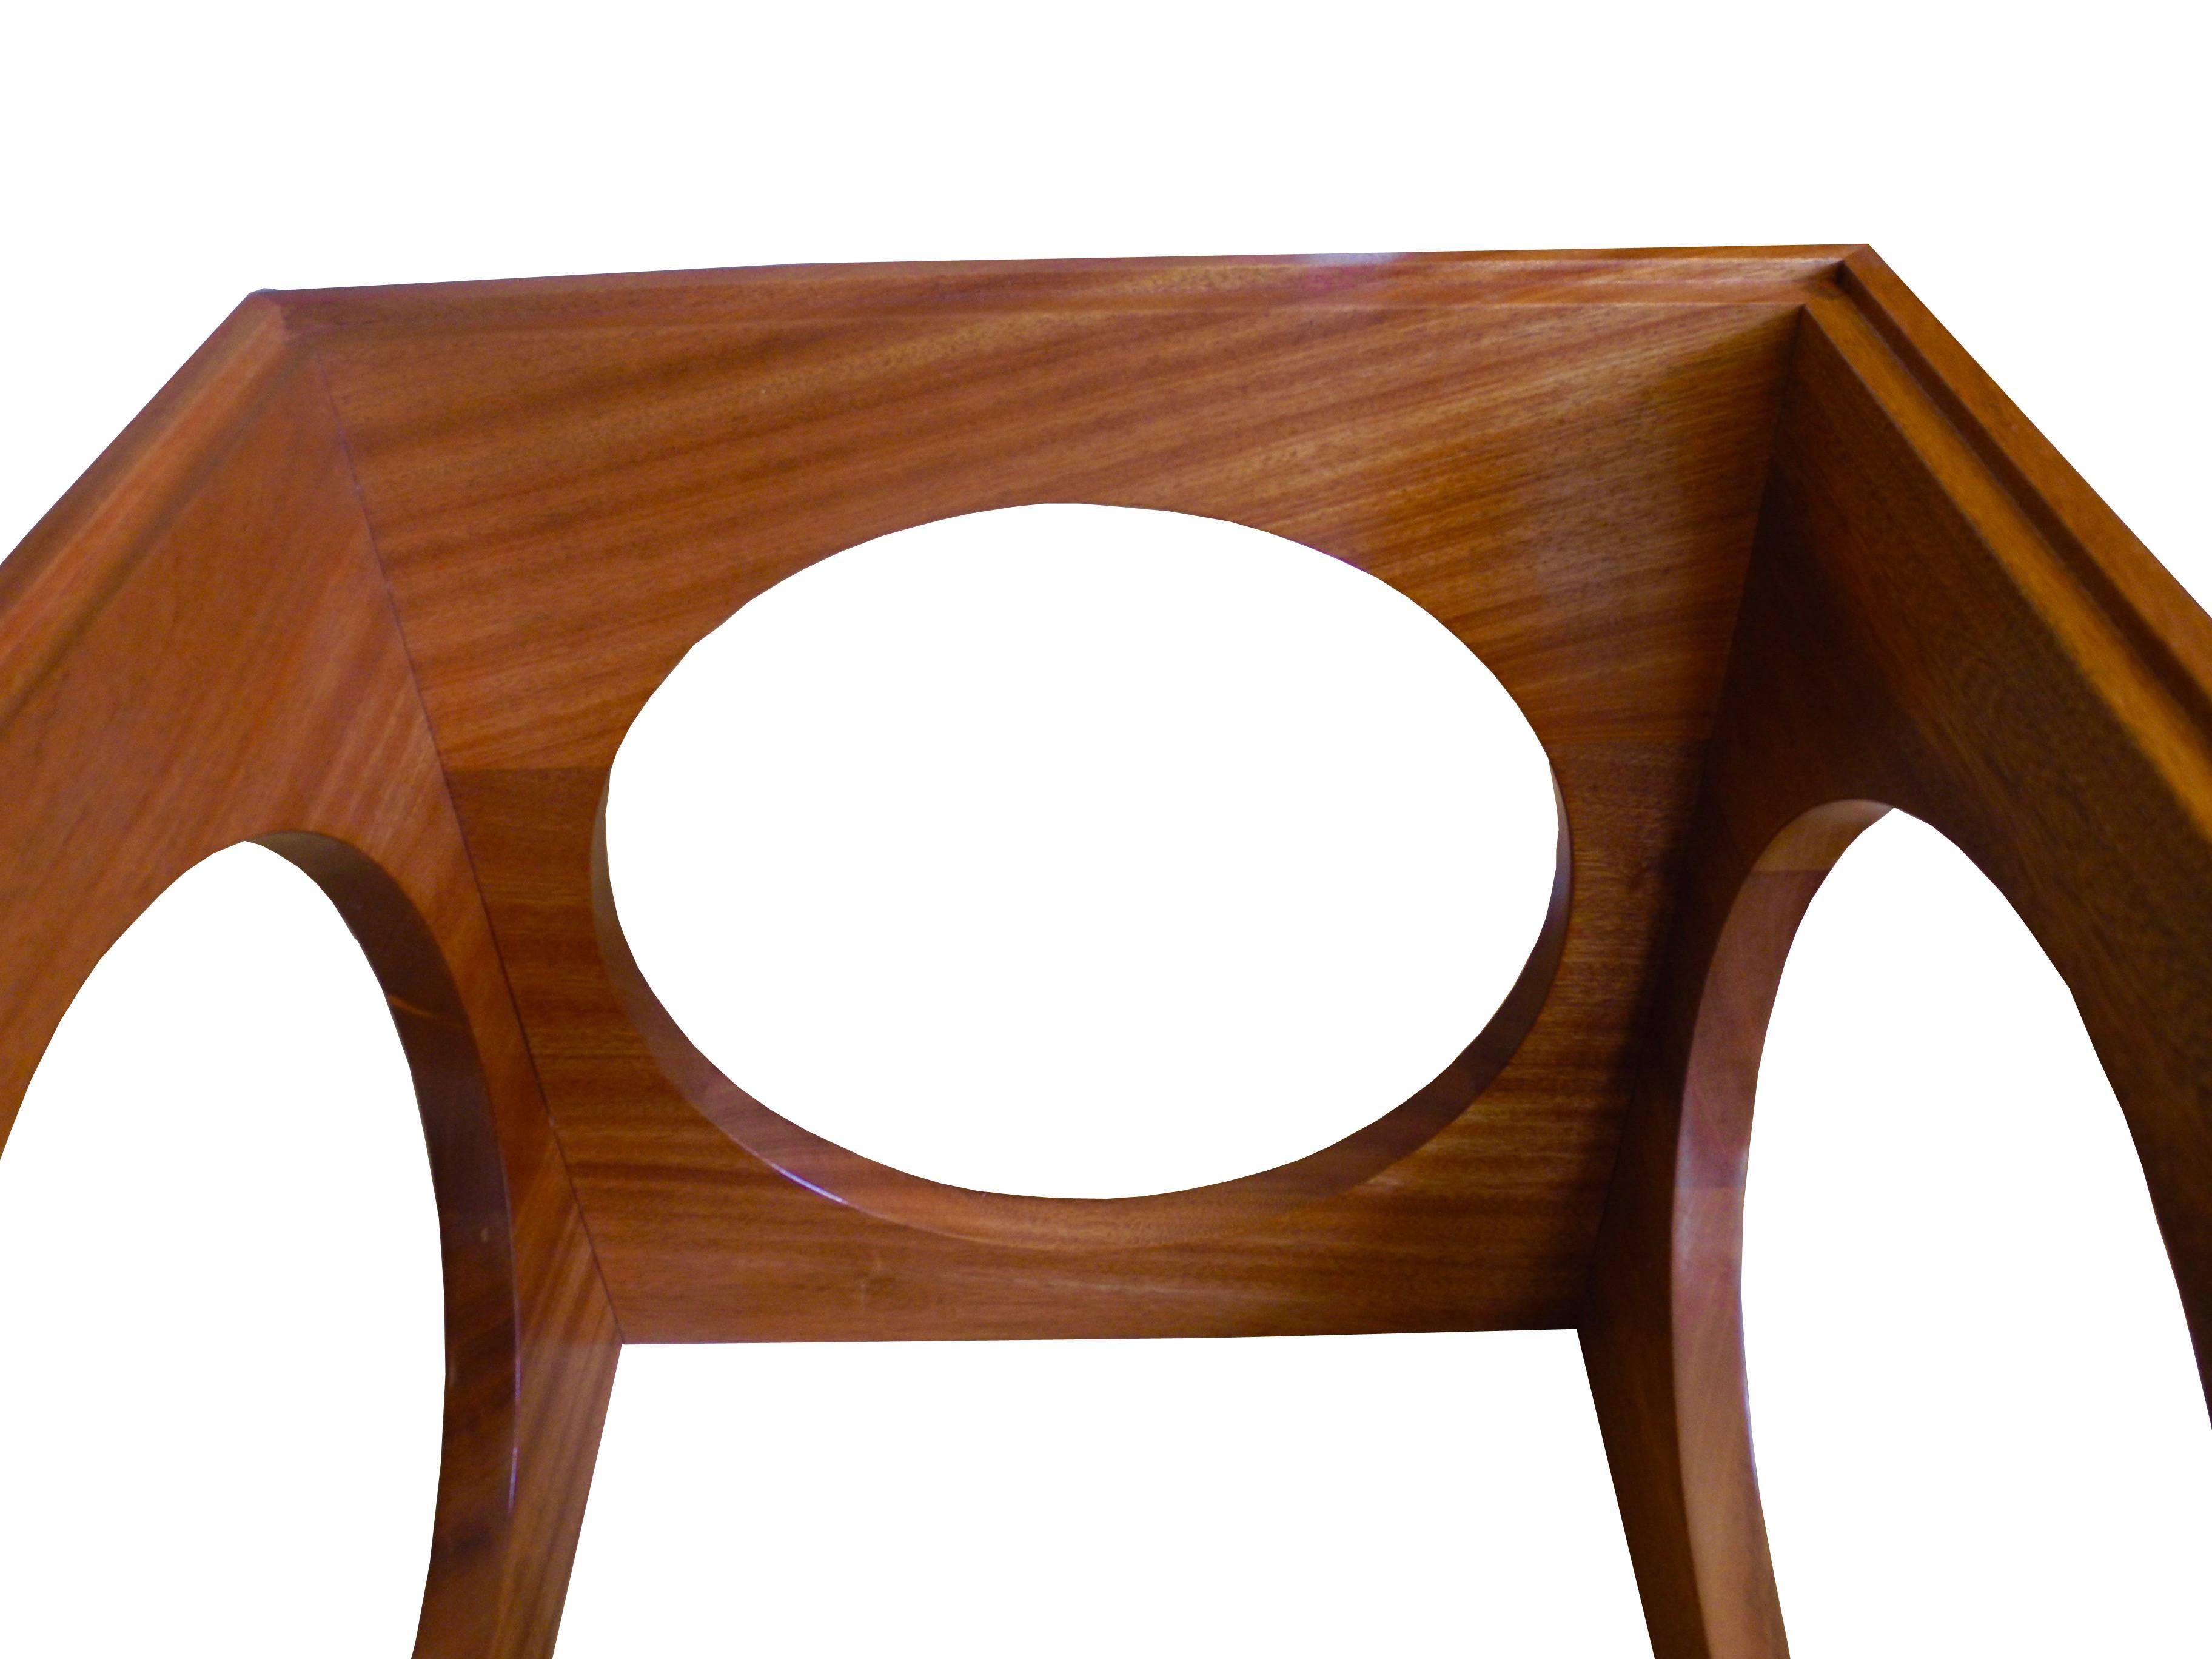 Contemporary Pair of Solid African Mahogany Nightstands or Side Tables by Corinne Robbins